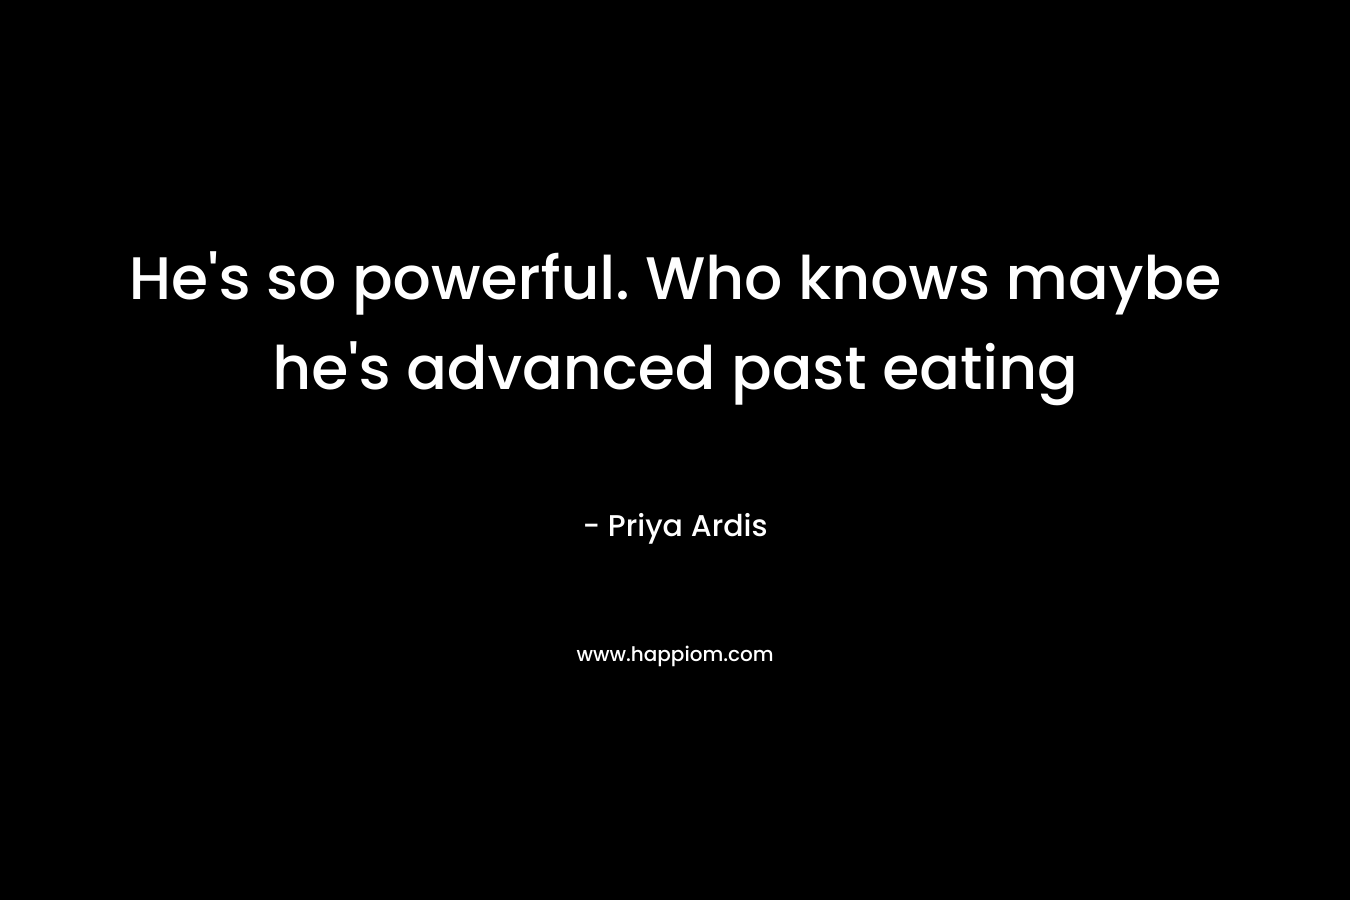 He’s so powerful. Who knows maybe he’s advanced past eating – Priya Ardis